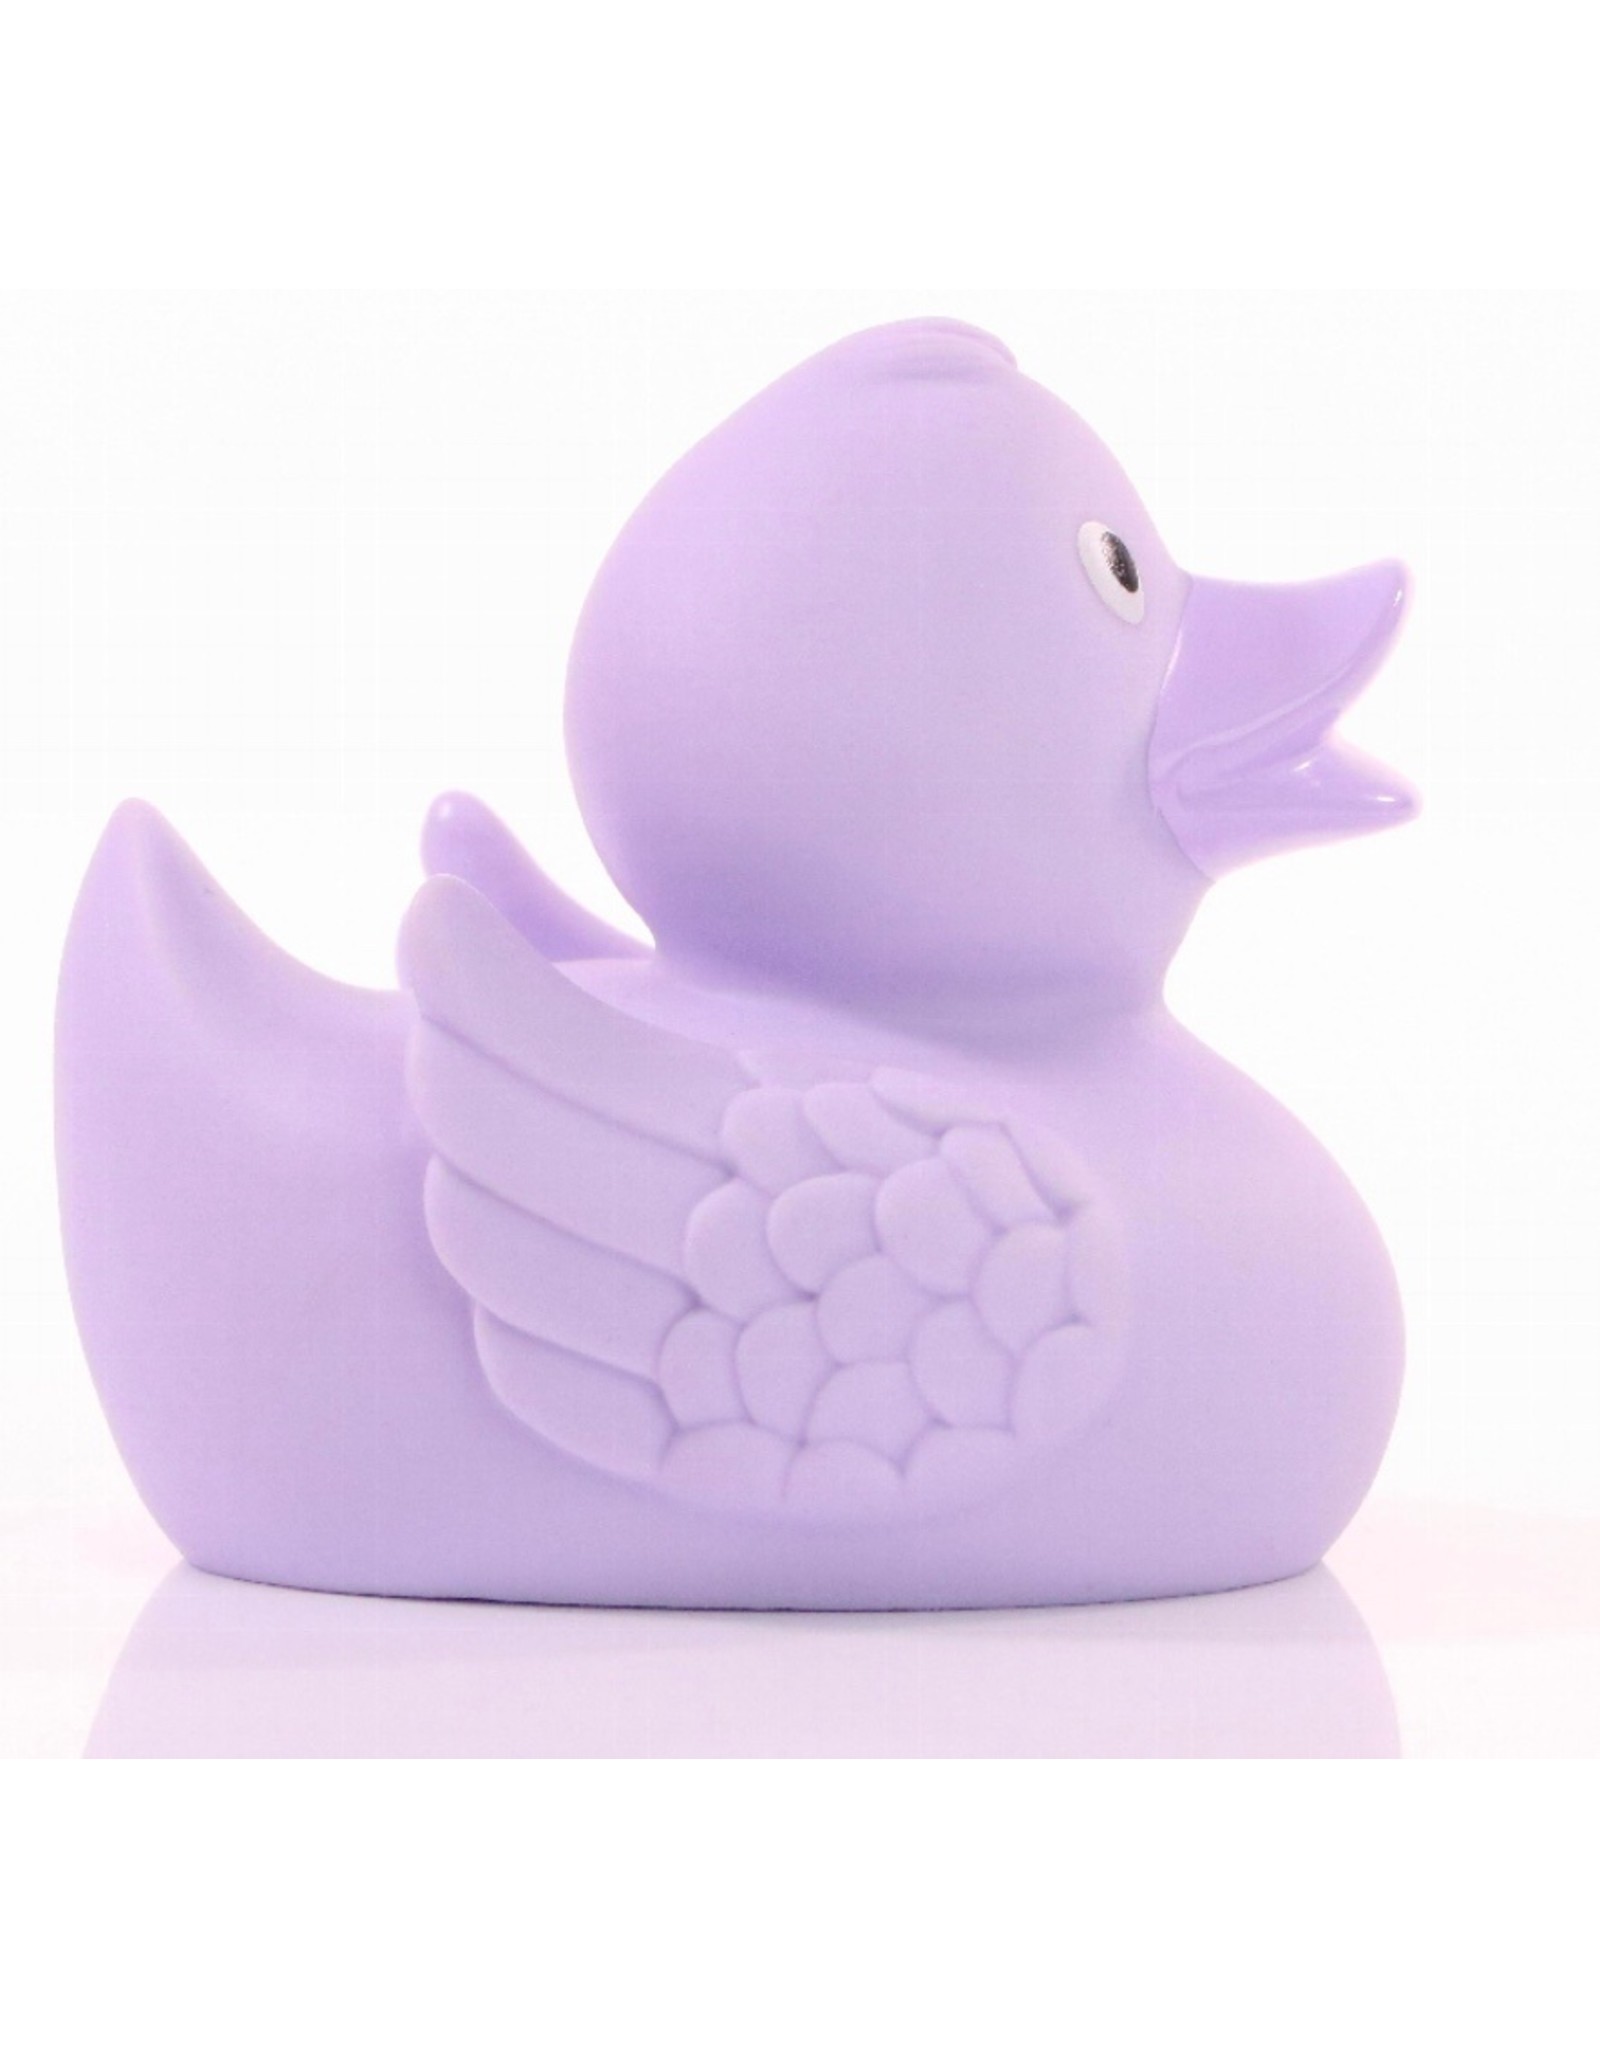 Pastel Purple Rubber Duck with Wings